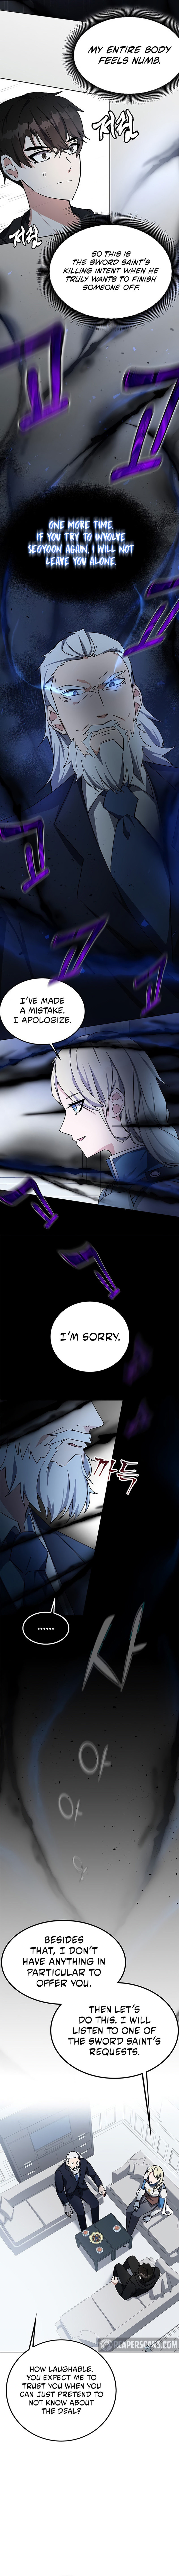 Transcension Academy - Chapter 17 Page 6